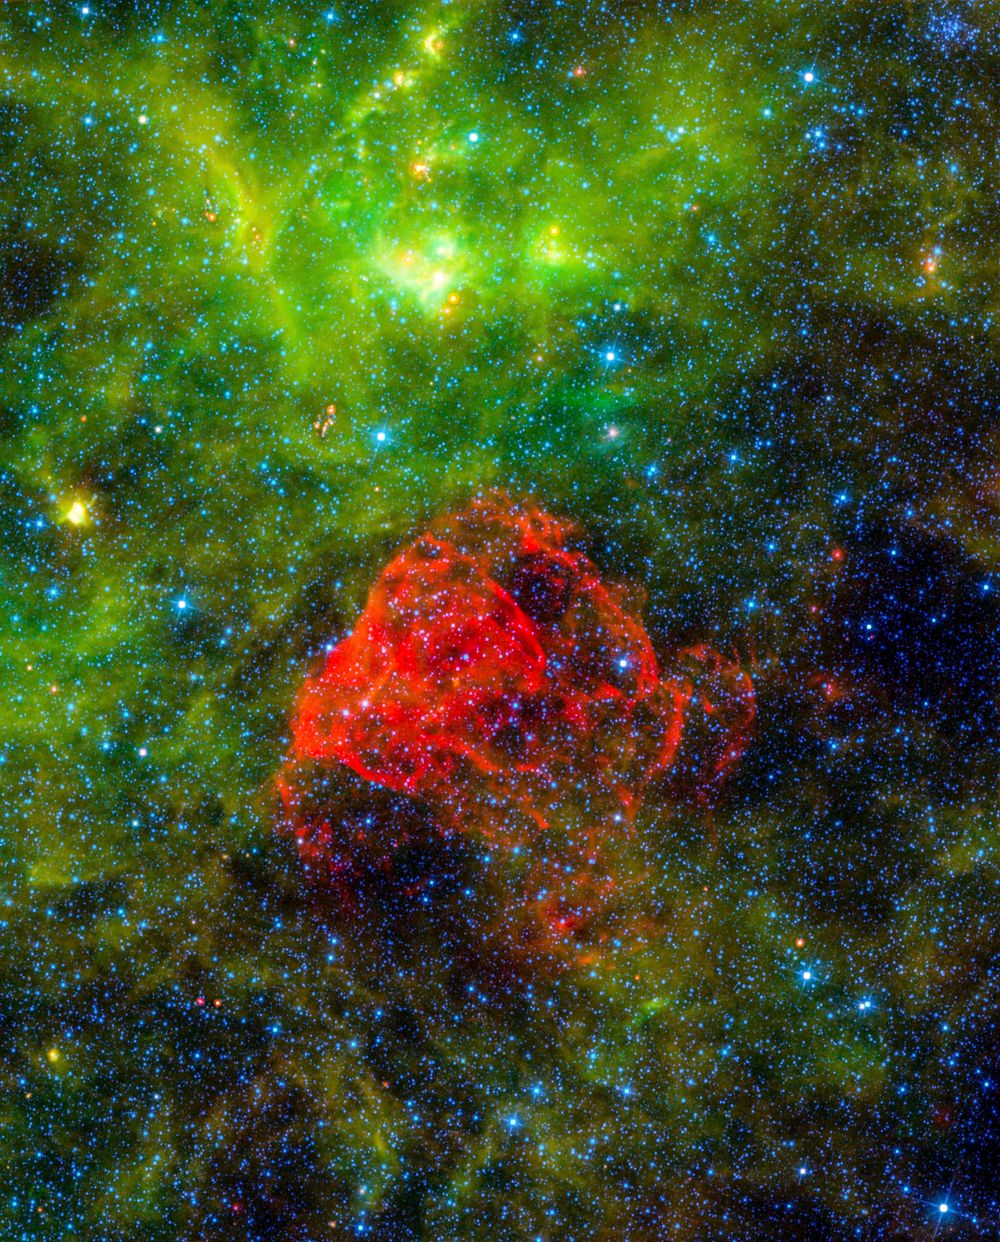 Puppis A is the remnant of a supernova explosion. Original from NASA. Digitally enhanced by rawpixel.